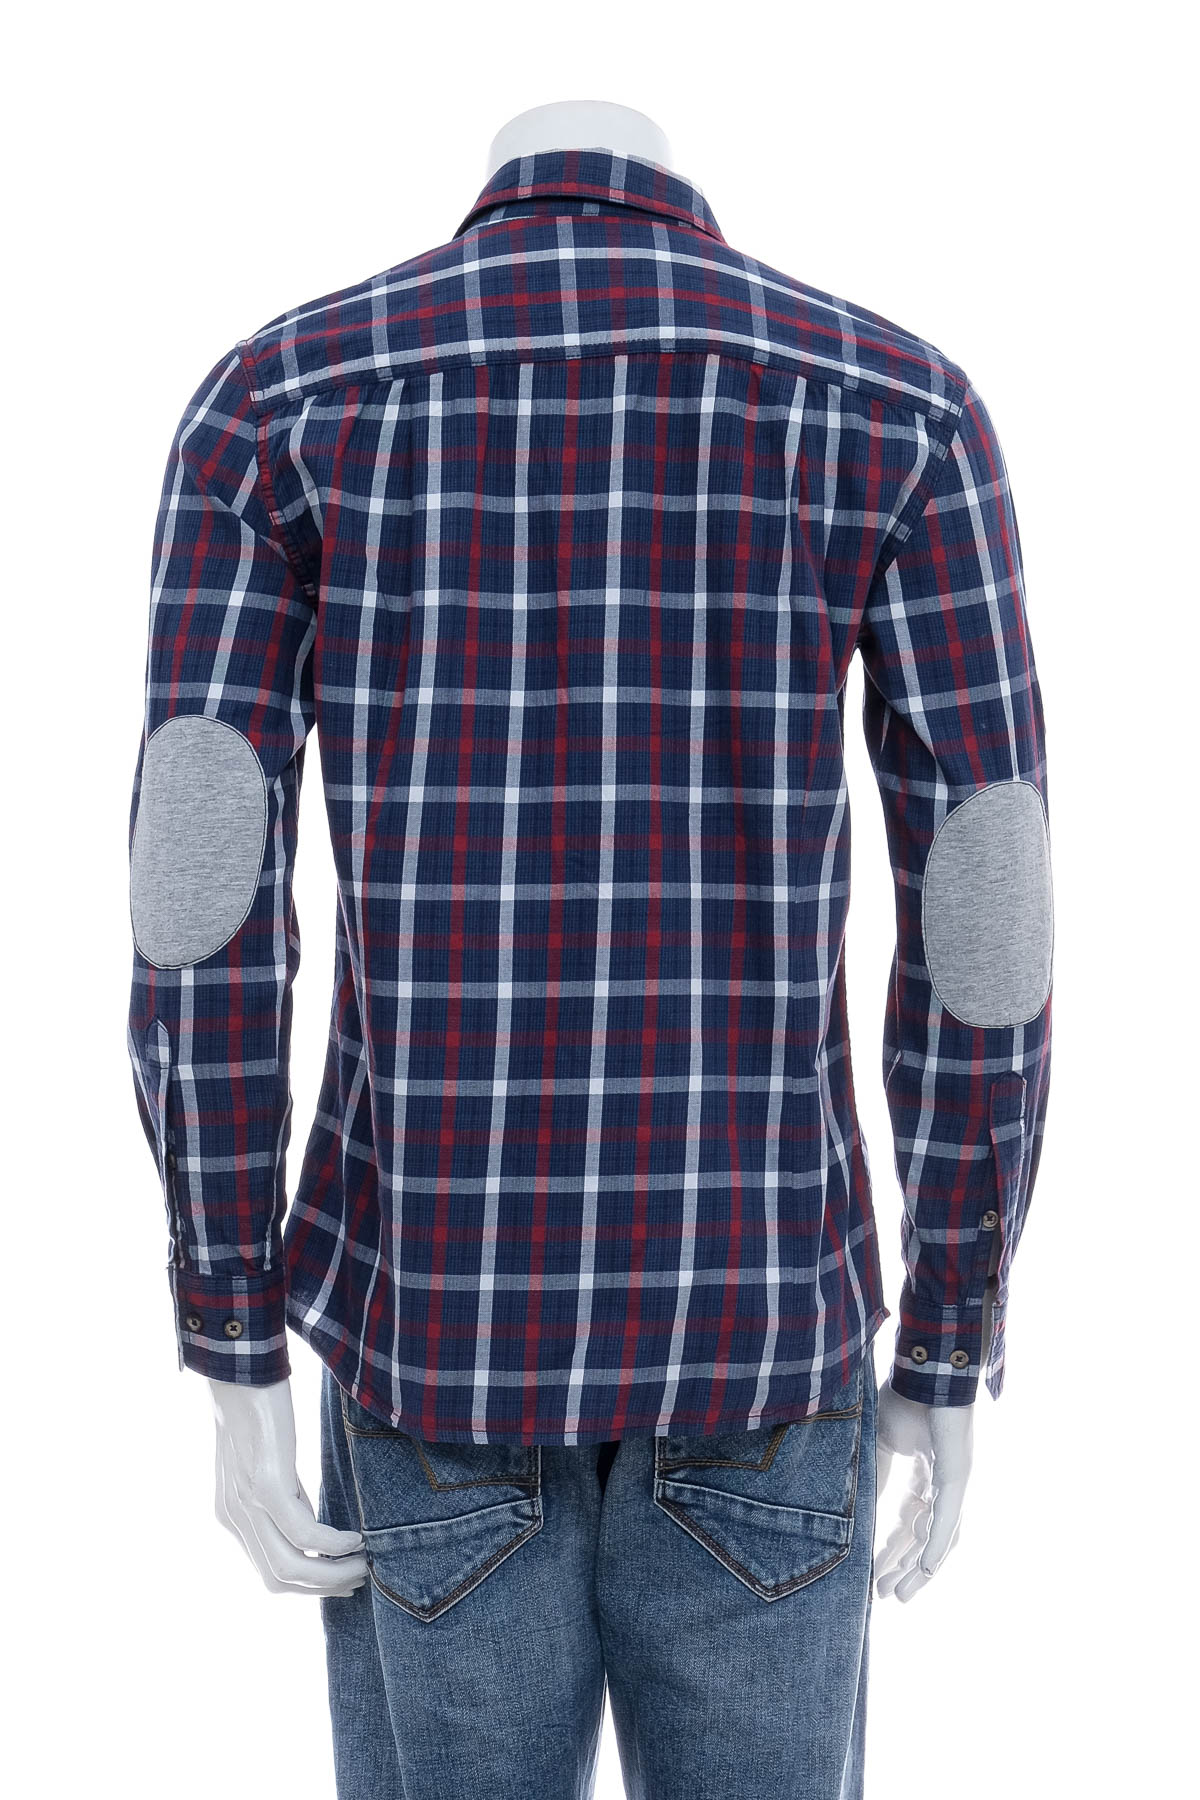 Men's shirt - YOUTH CARRY CLTH - 1